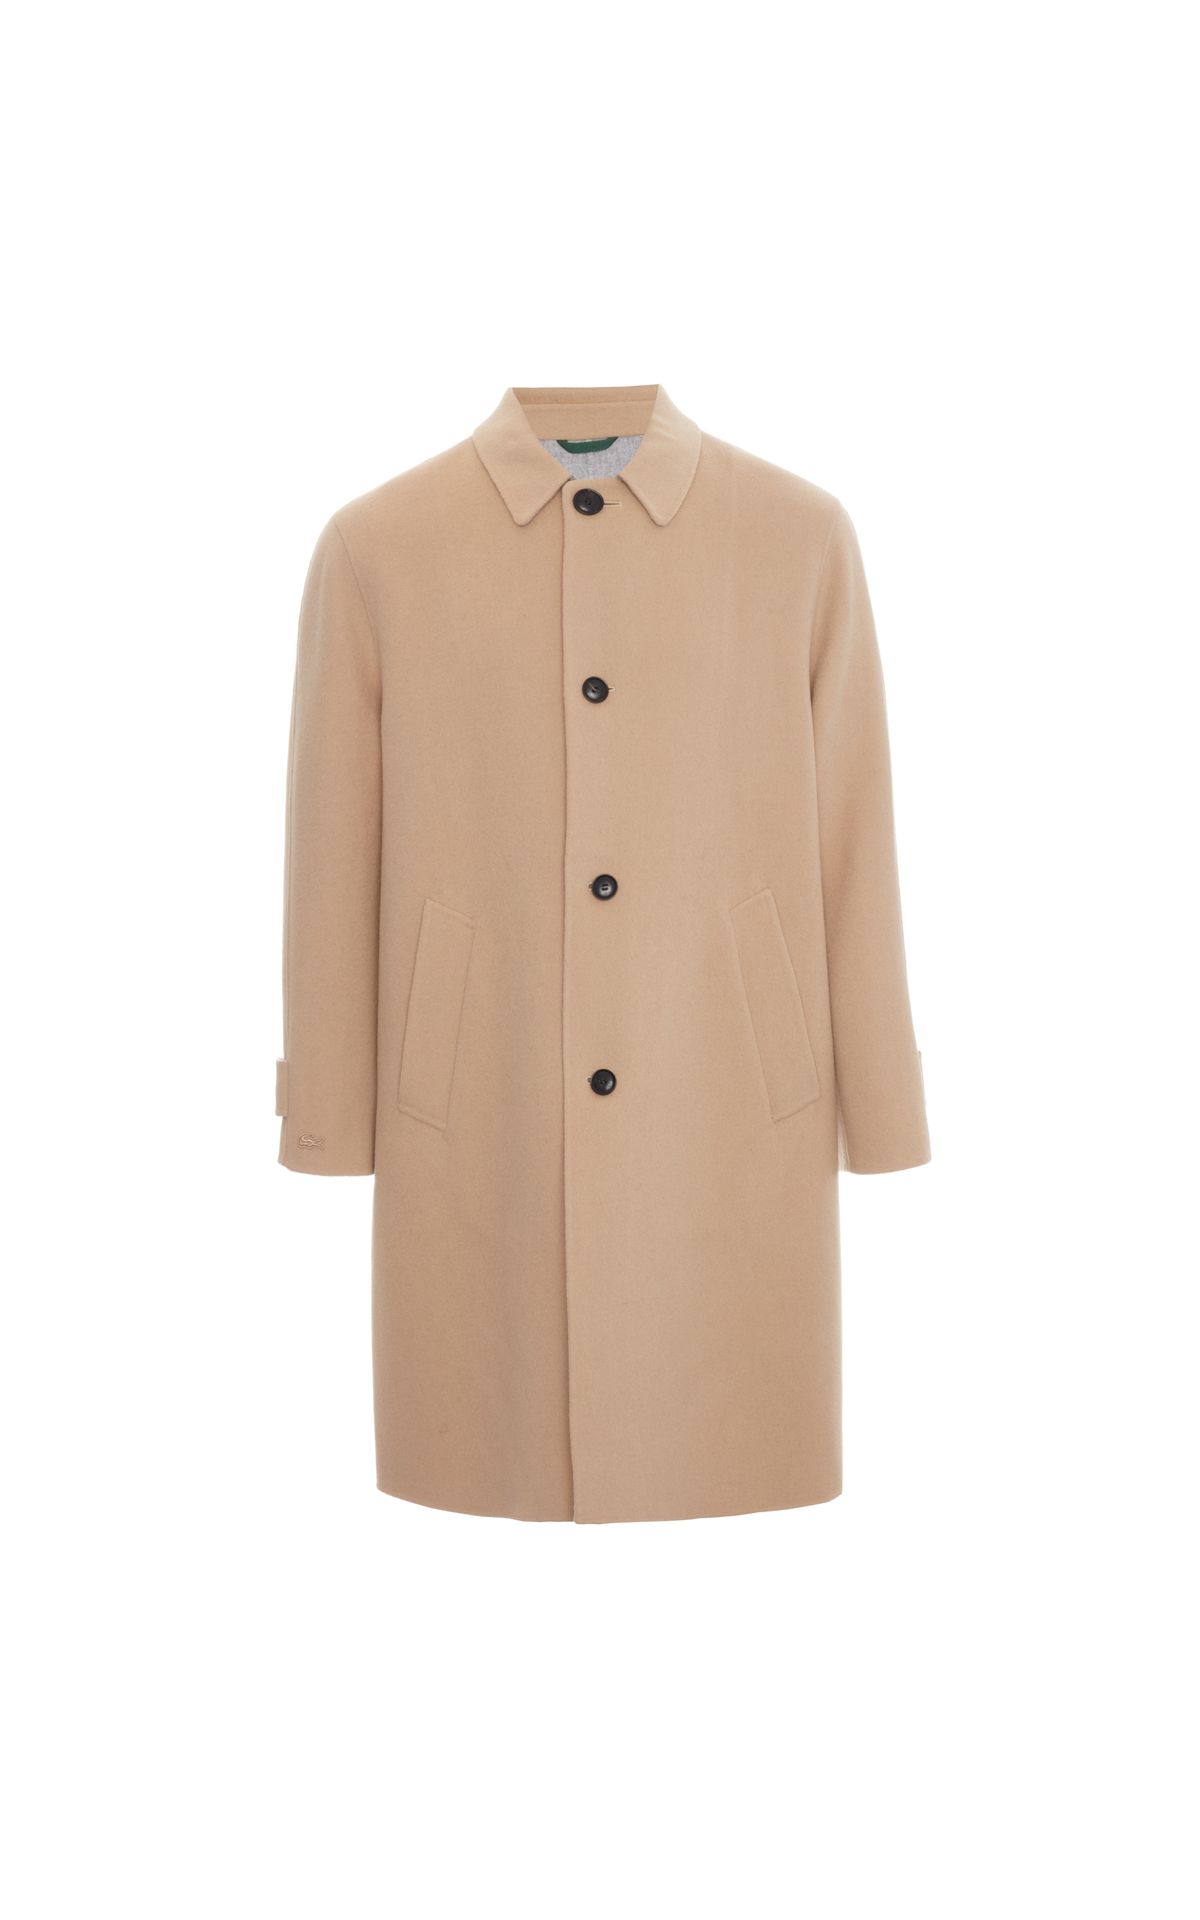 Lacoste Wool overcoat from Bicester Village